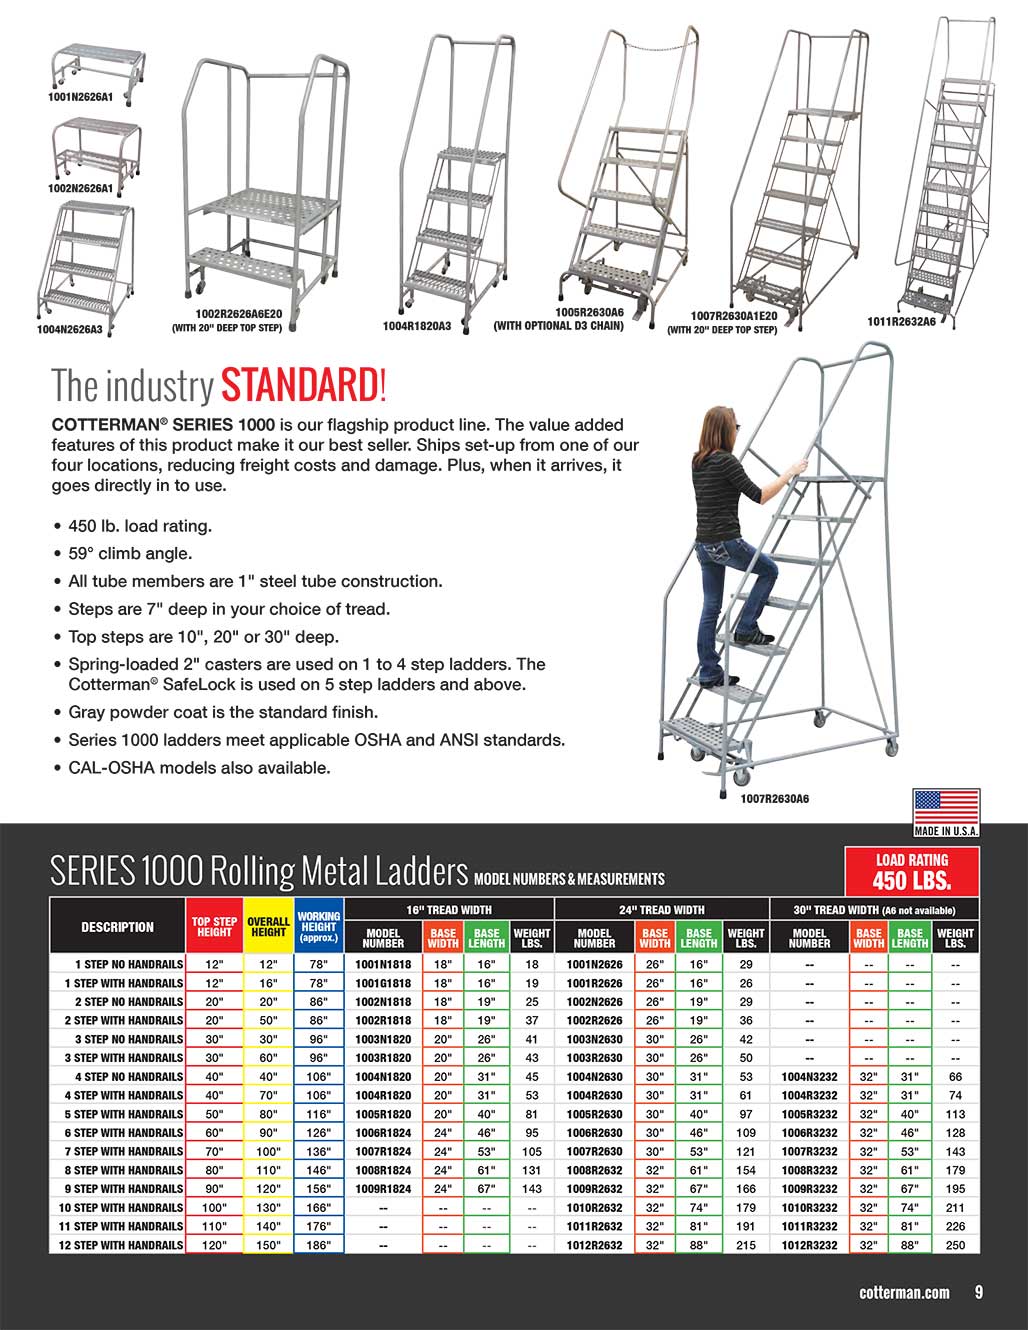 Cotterman Series 1000 Rolling Ladder Technical Specs